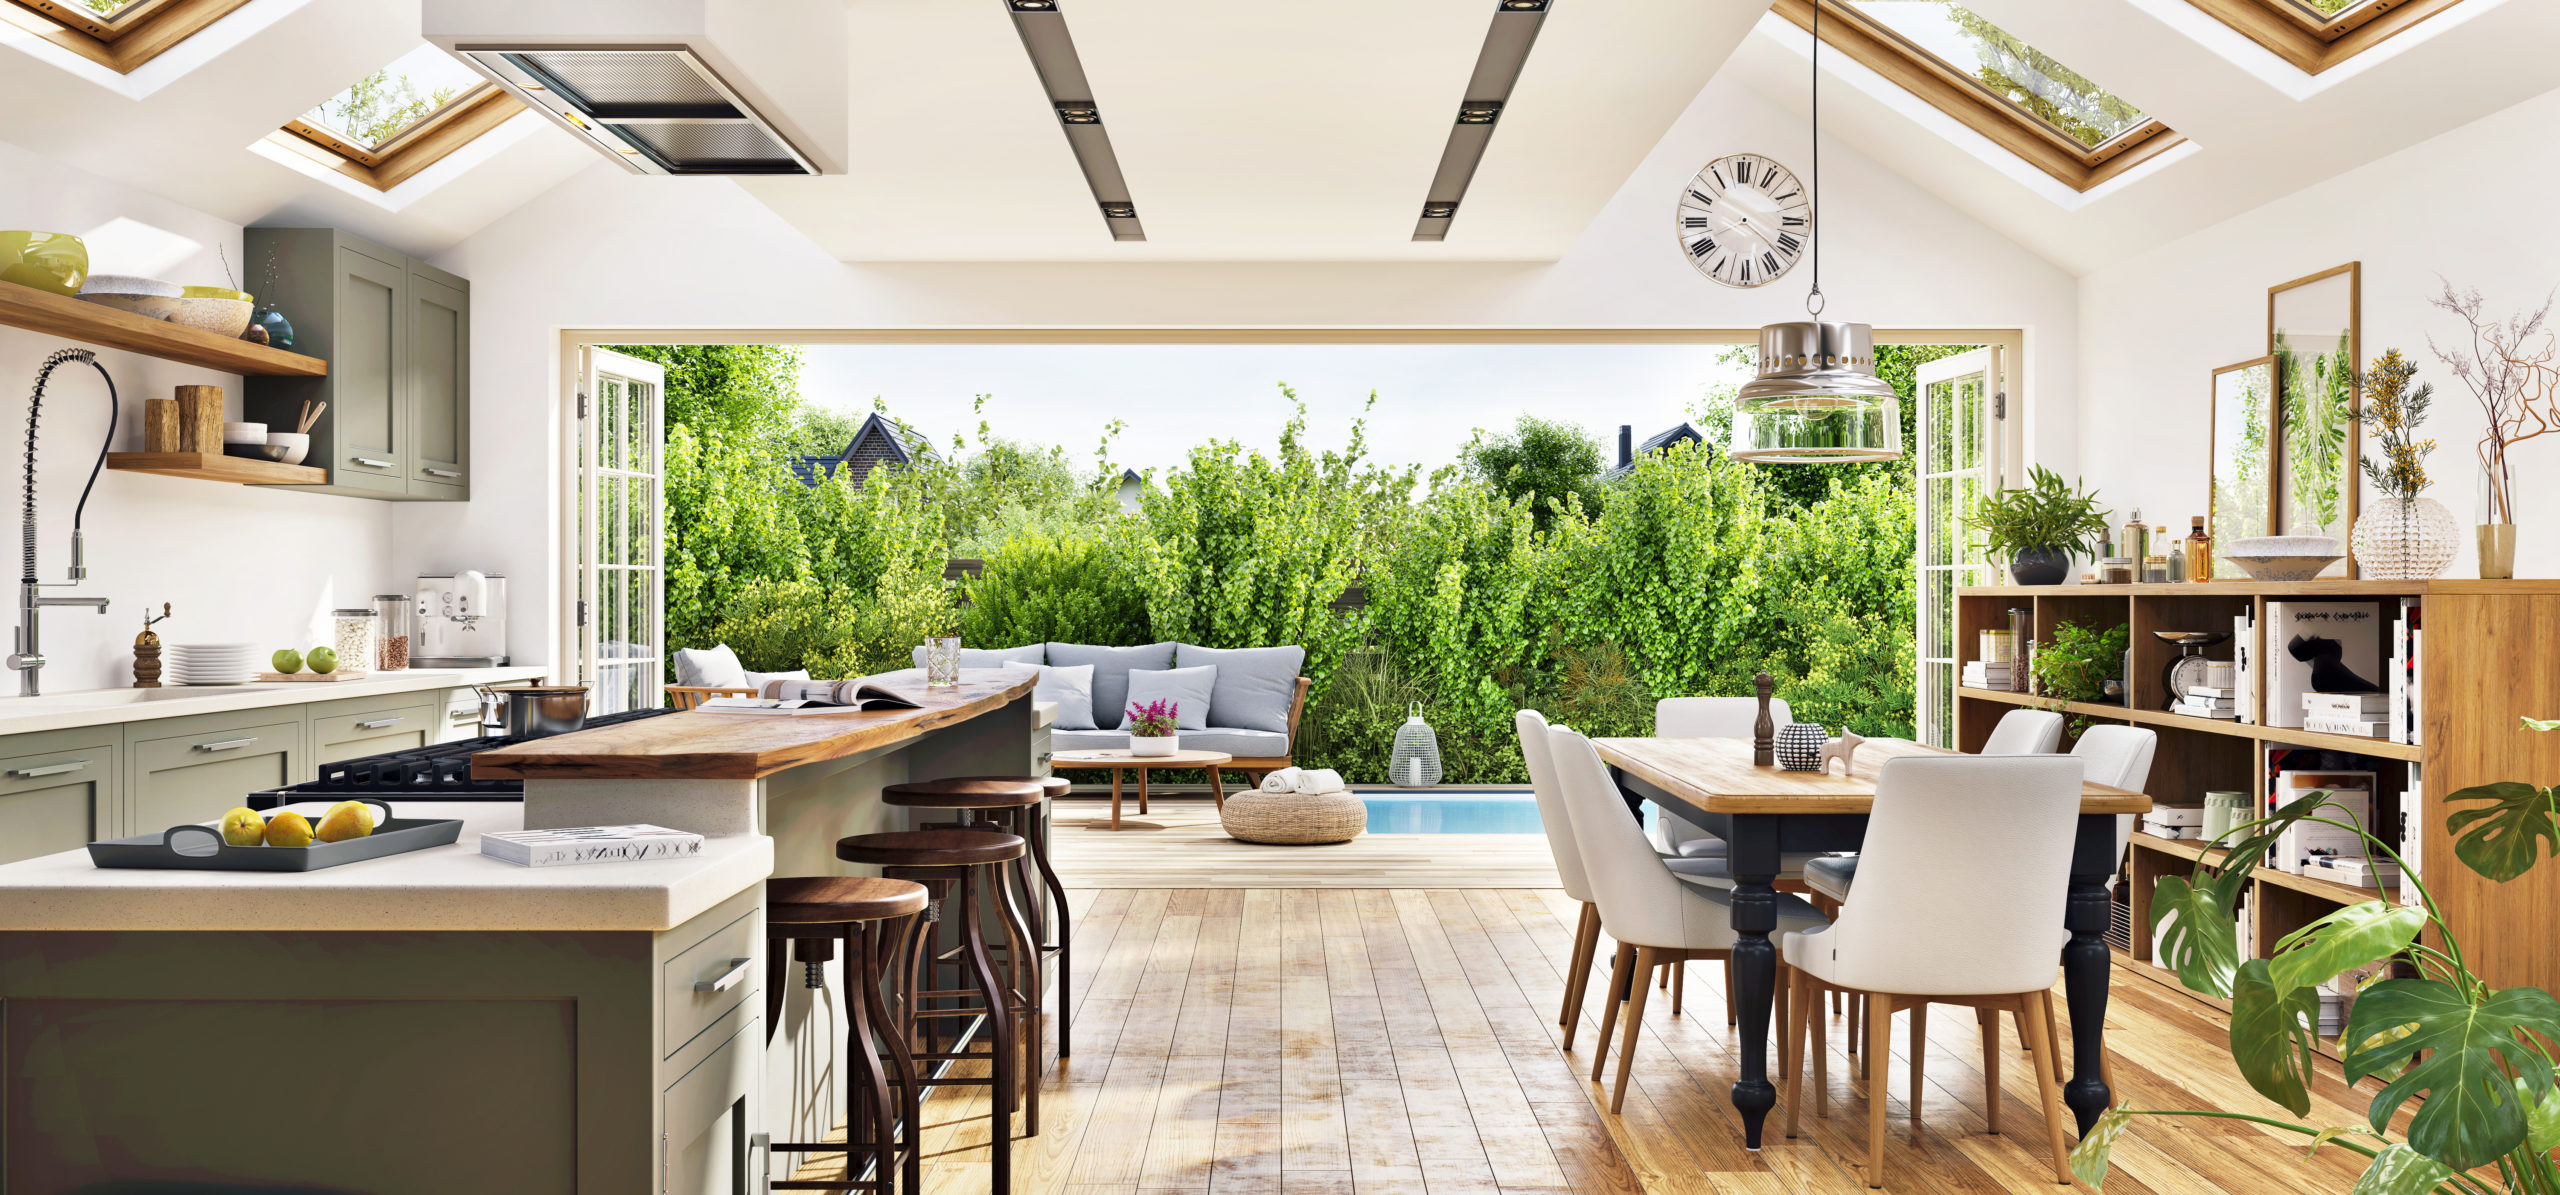 How To Create An Outdoor Space Ready For The Summer